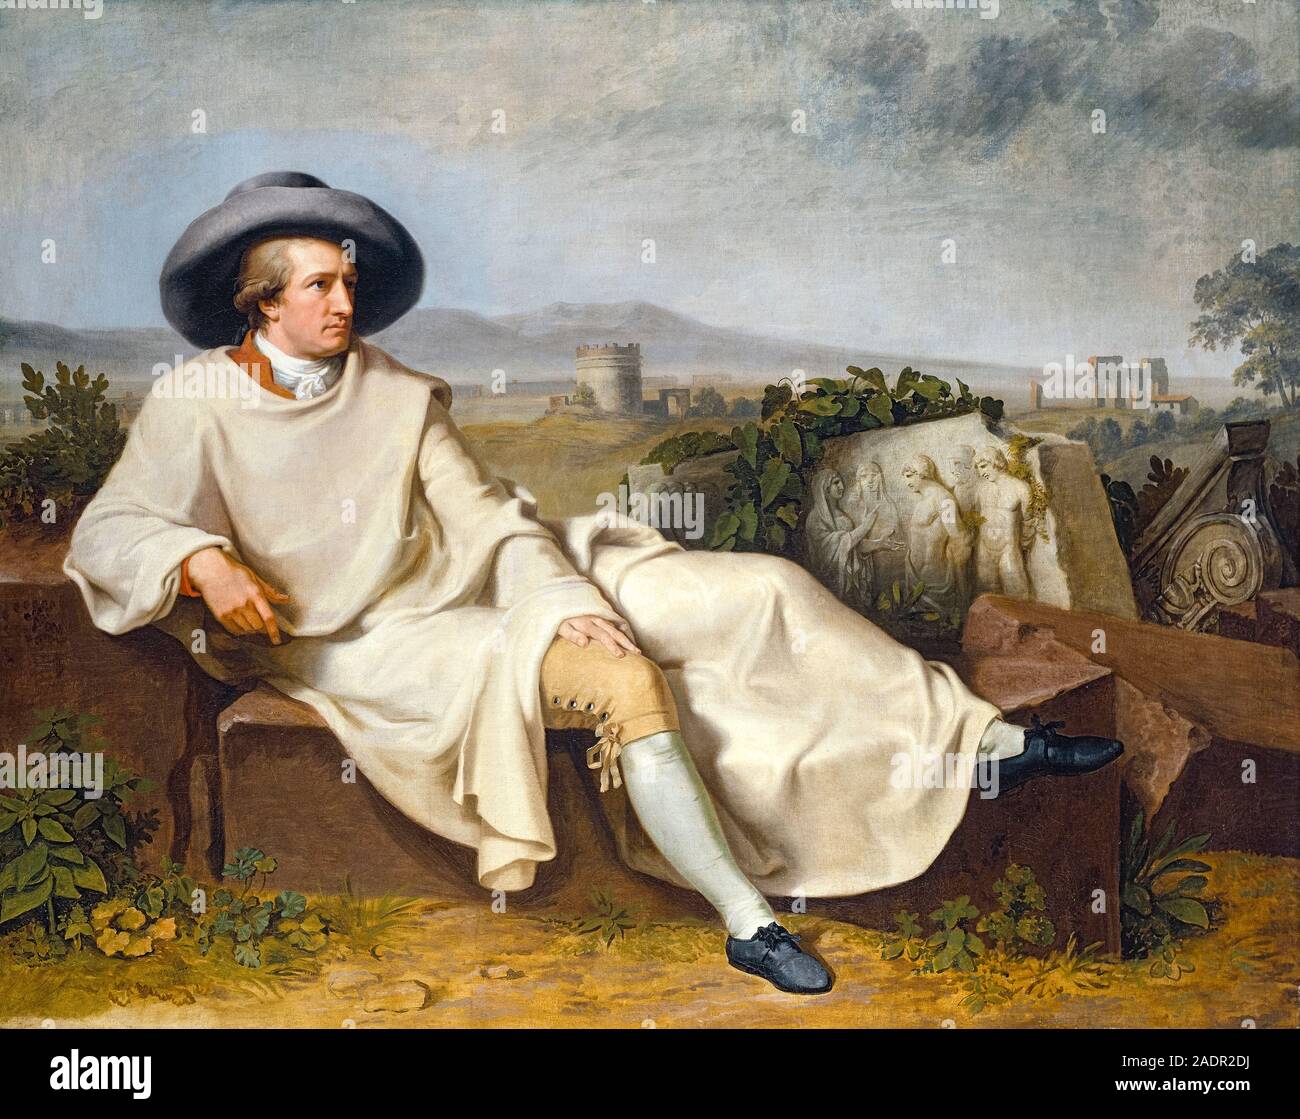 Goethe in the Roman Campagna by Johann Heinrich Wilhelm Tischbein (1751-1829) painted in 1787 showing Johann Wolfgang von Goethe (1749-1832) German writer and statesman whilst traveling in Italy. Stock Photo